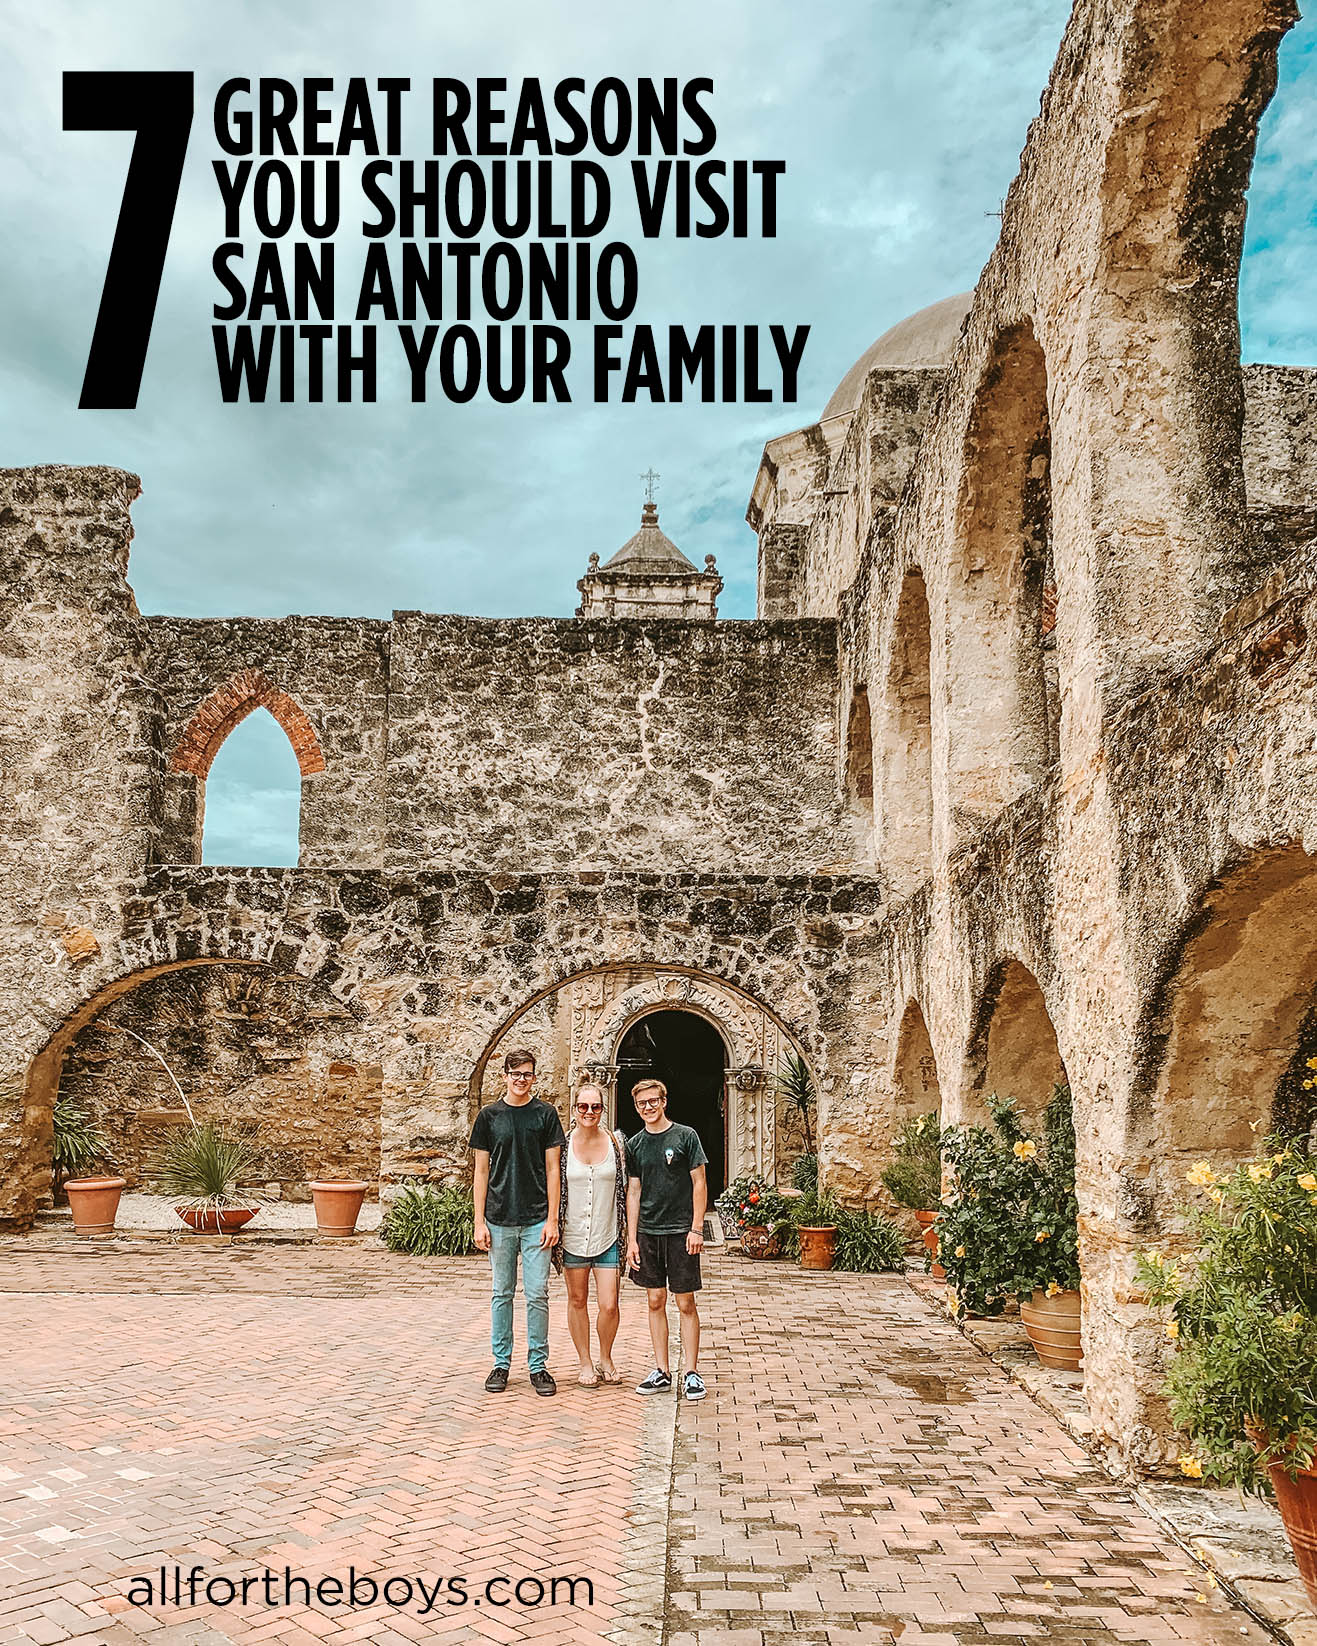 7 Great Reasons You Should Visit San Antonio With Your Family